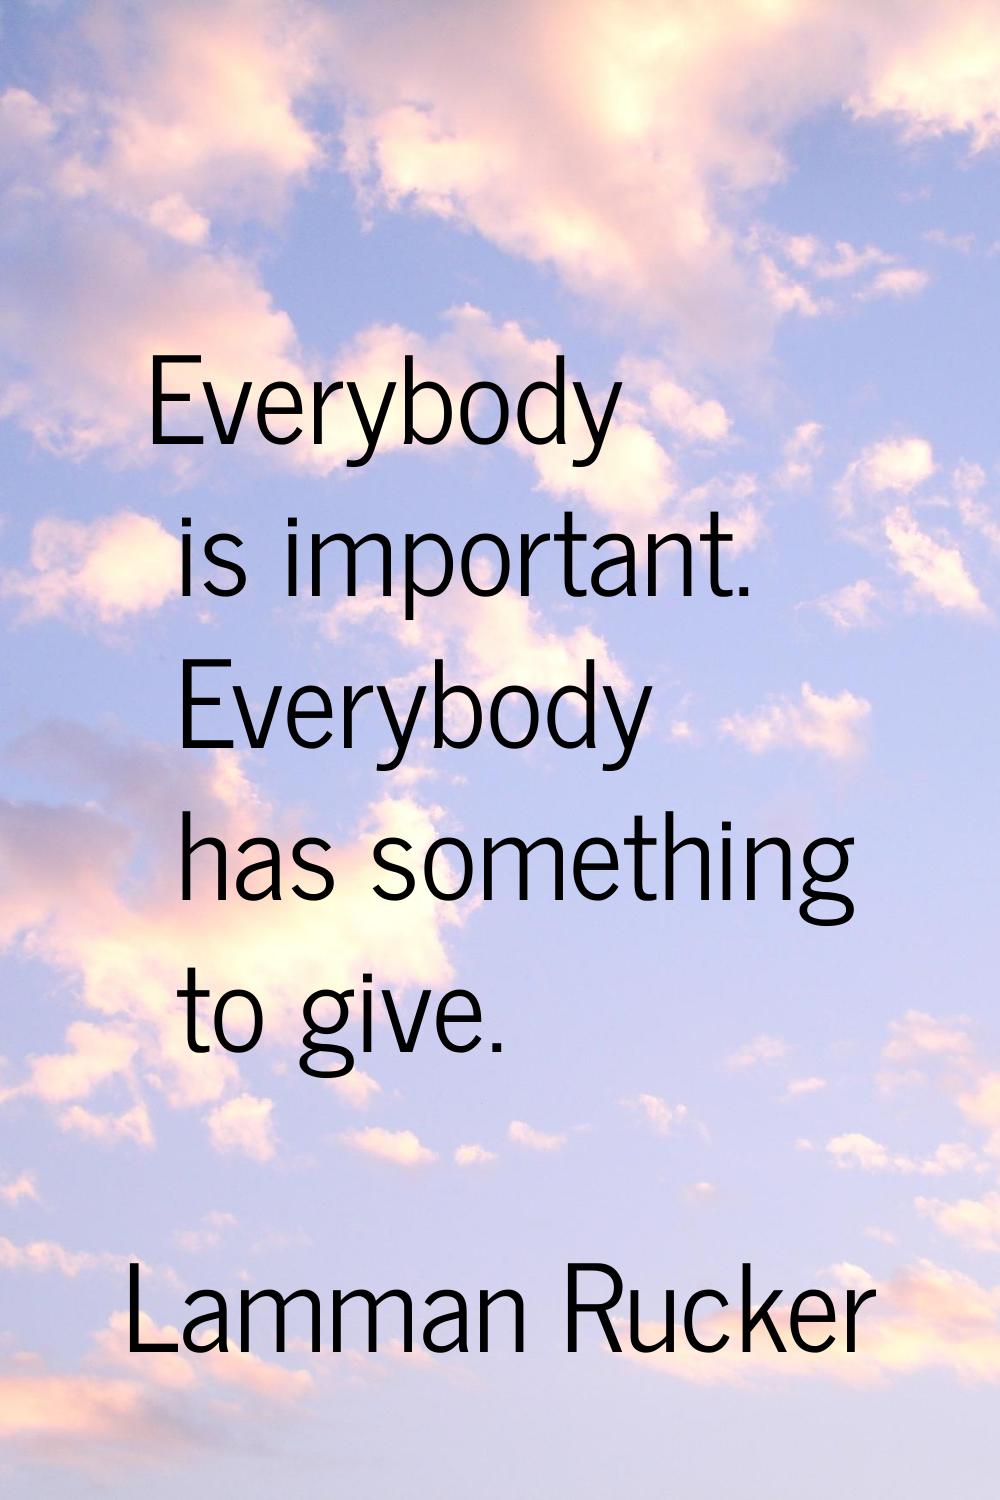 Everybody is important. Everybody has something to give.